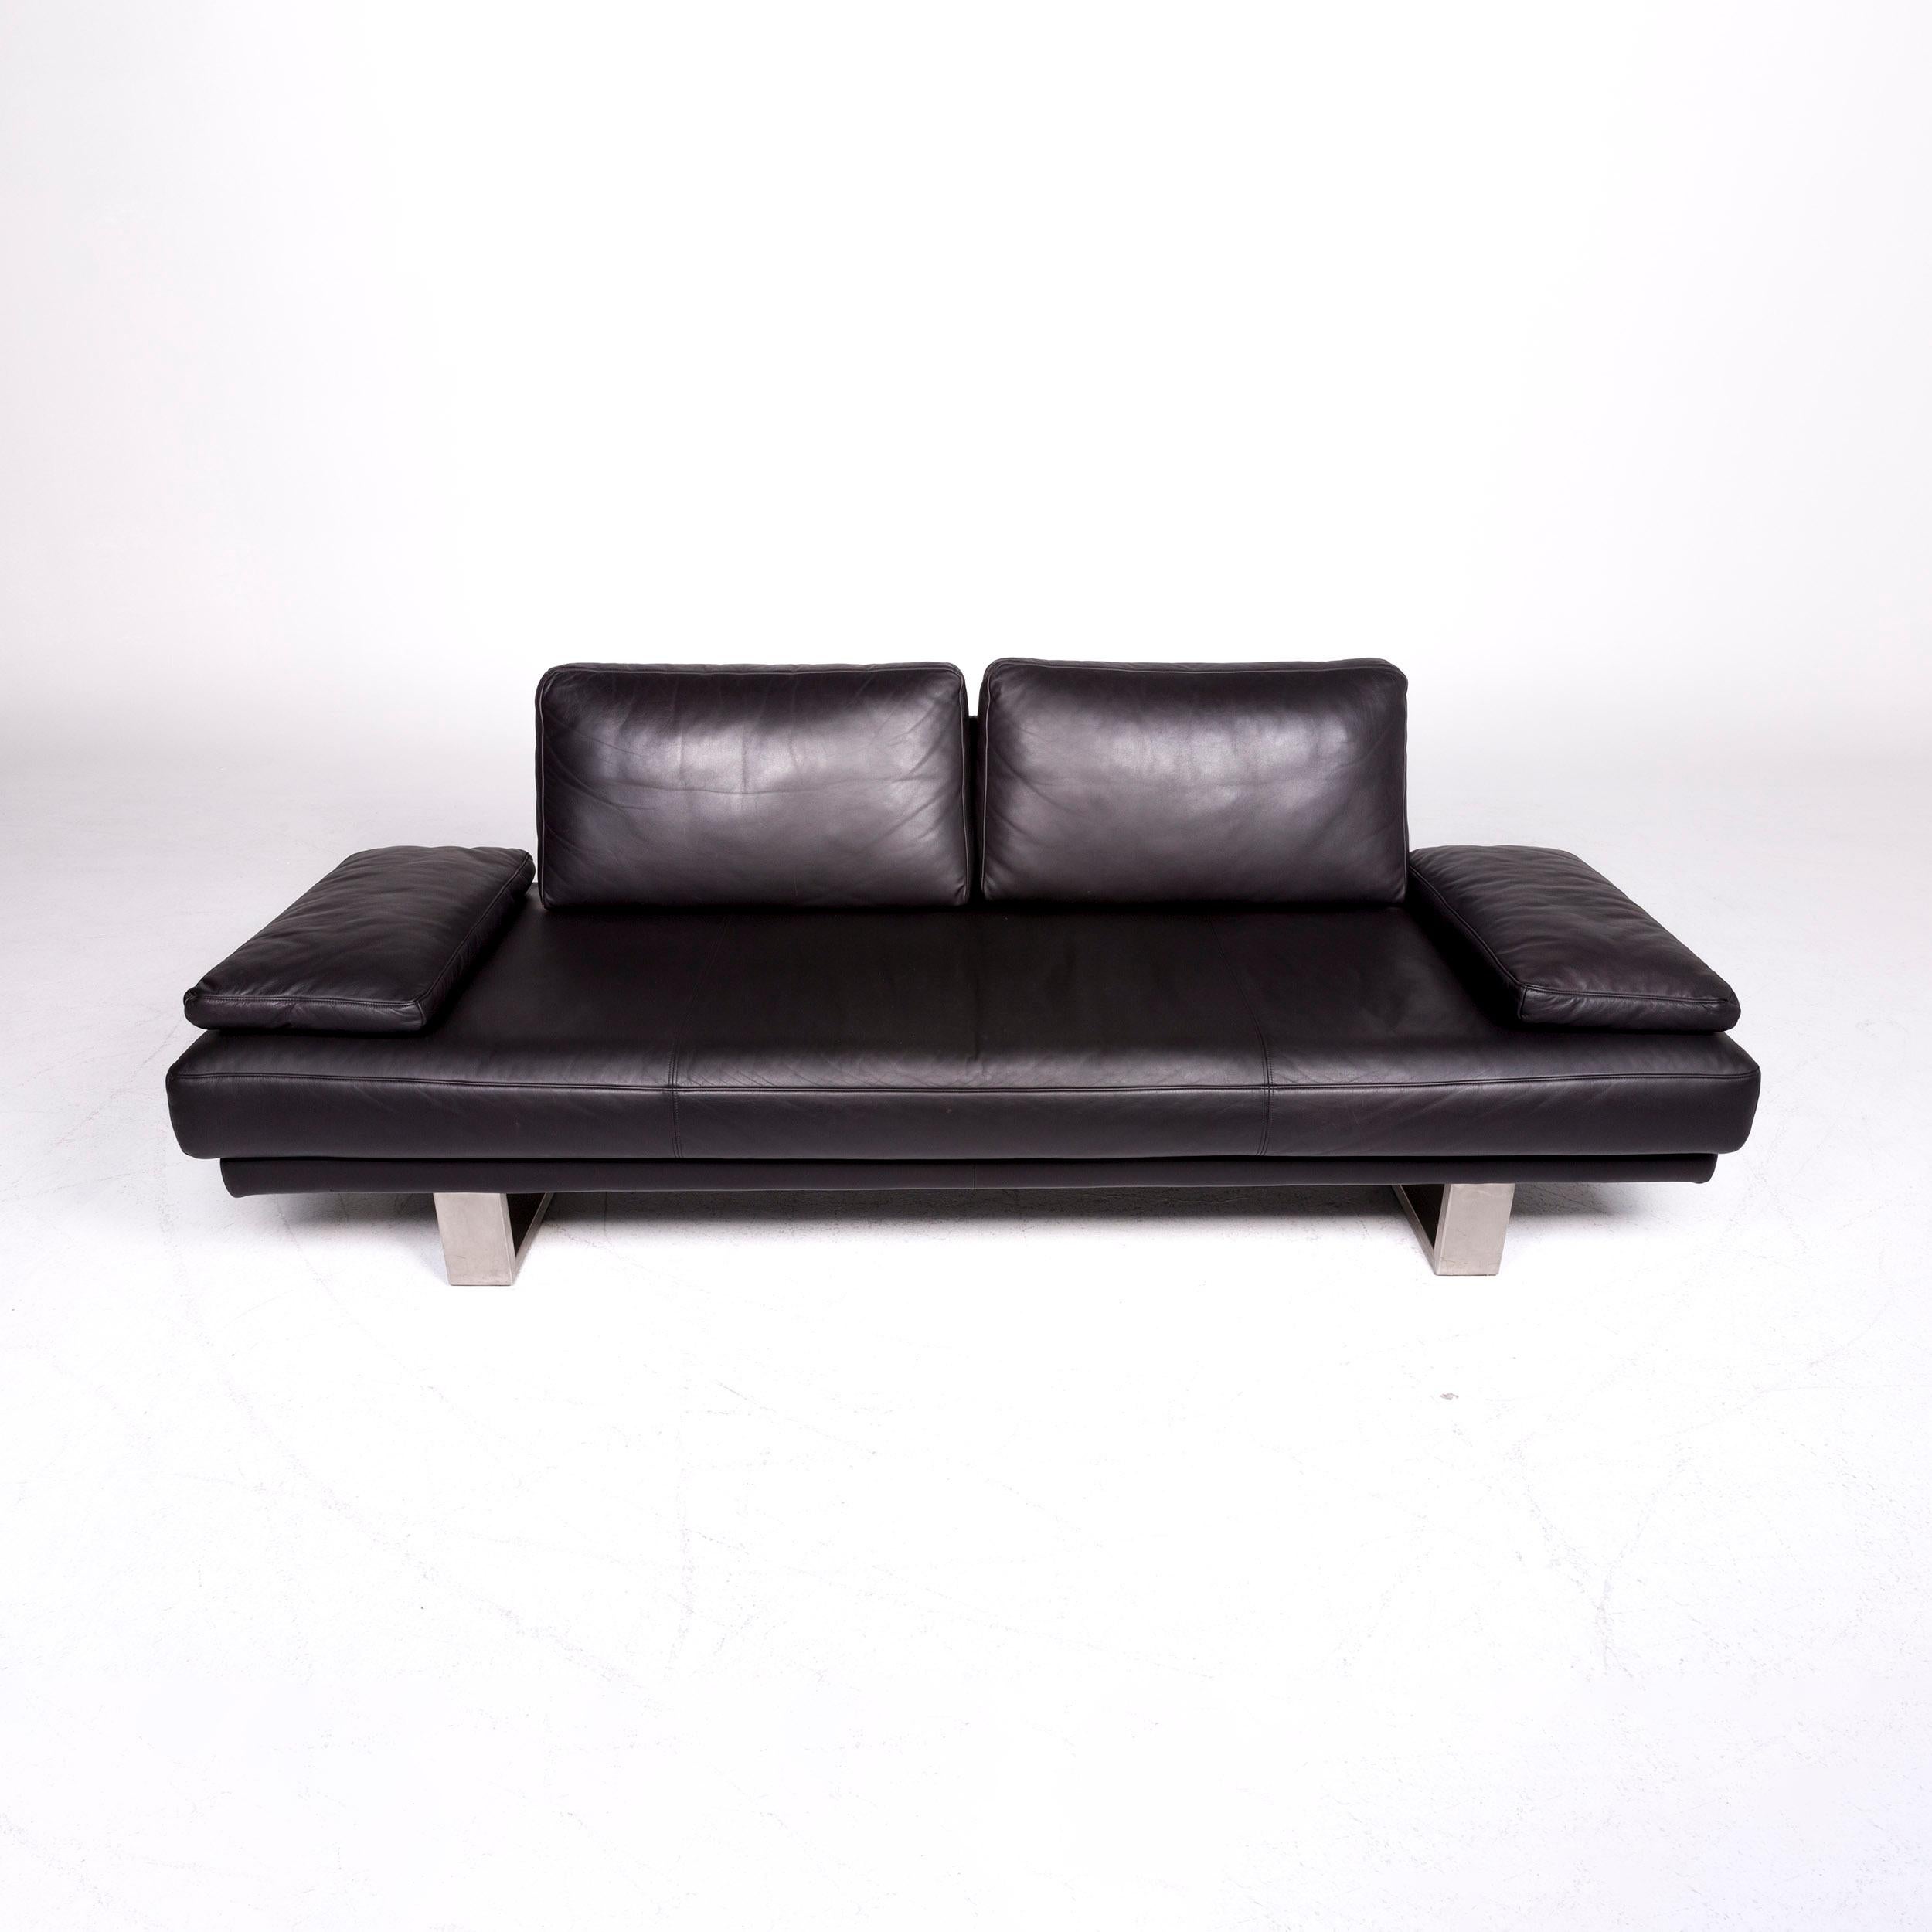 Rolf Benz 6600 Designer Leather Sofa Black Two-Seat Couch 1